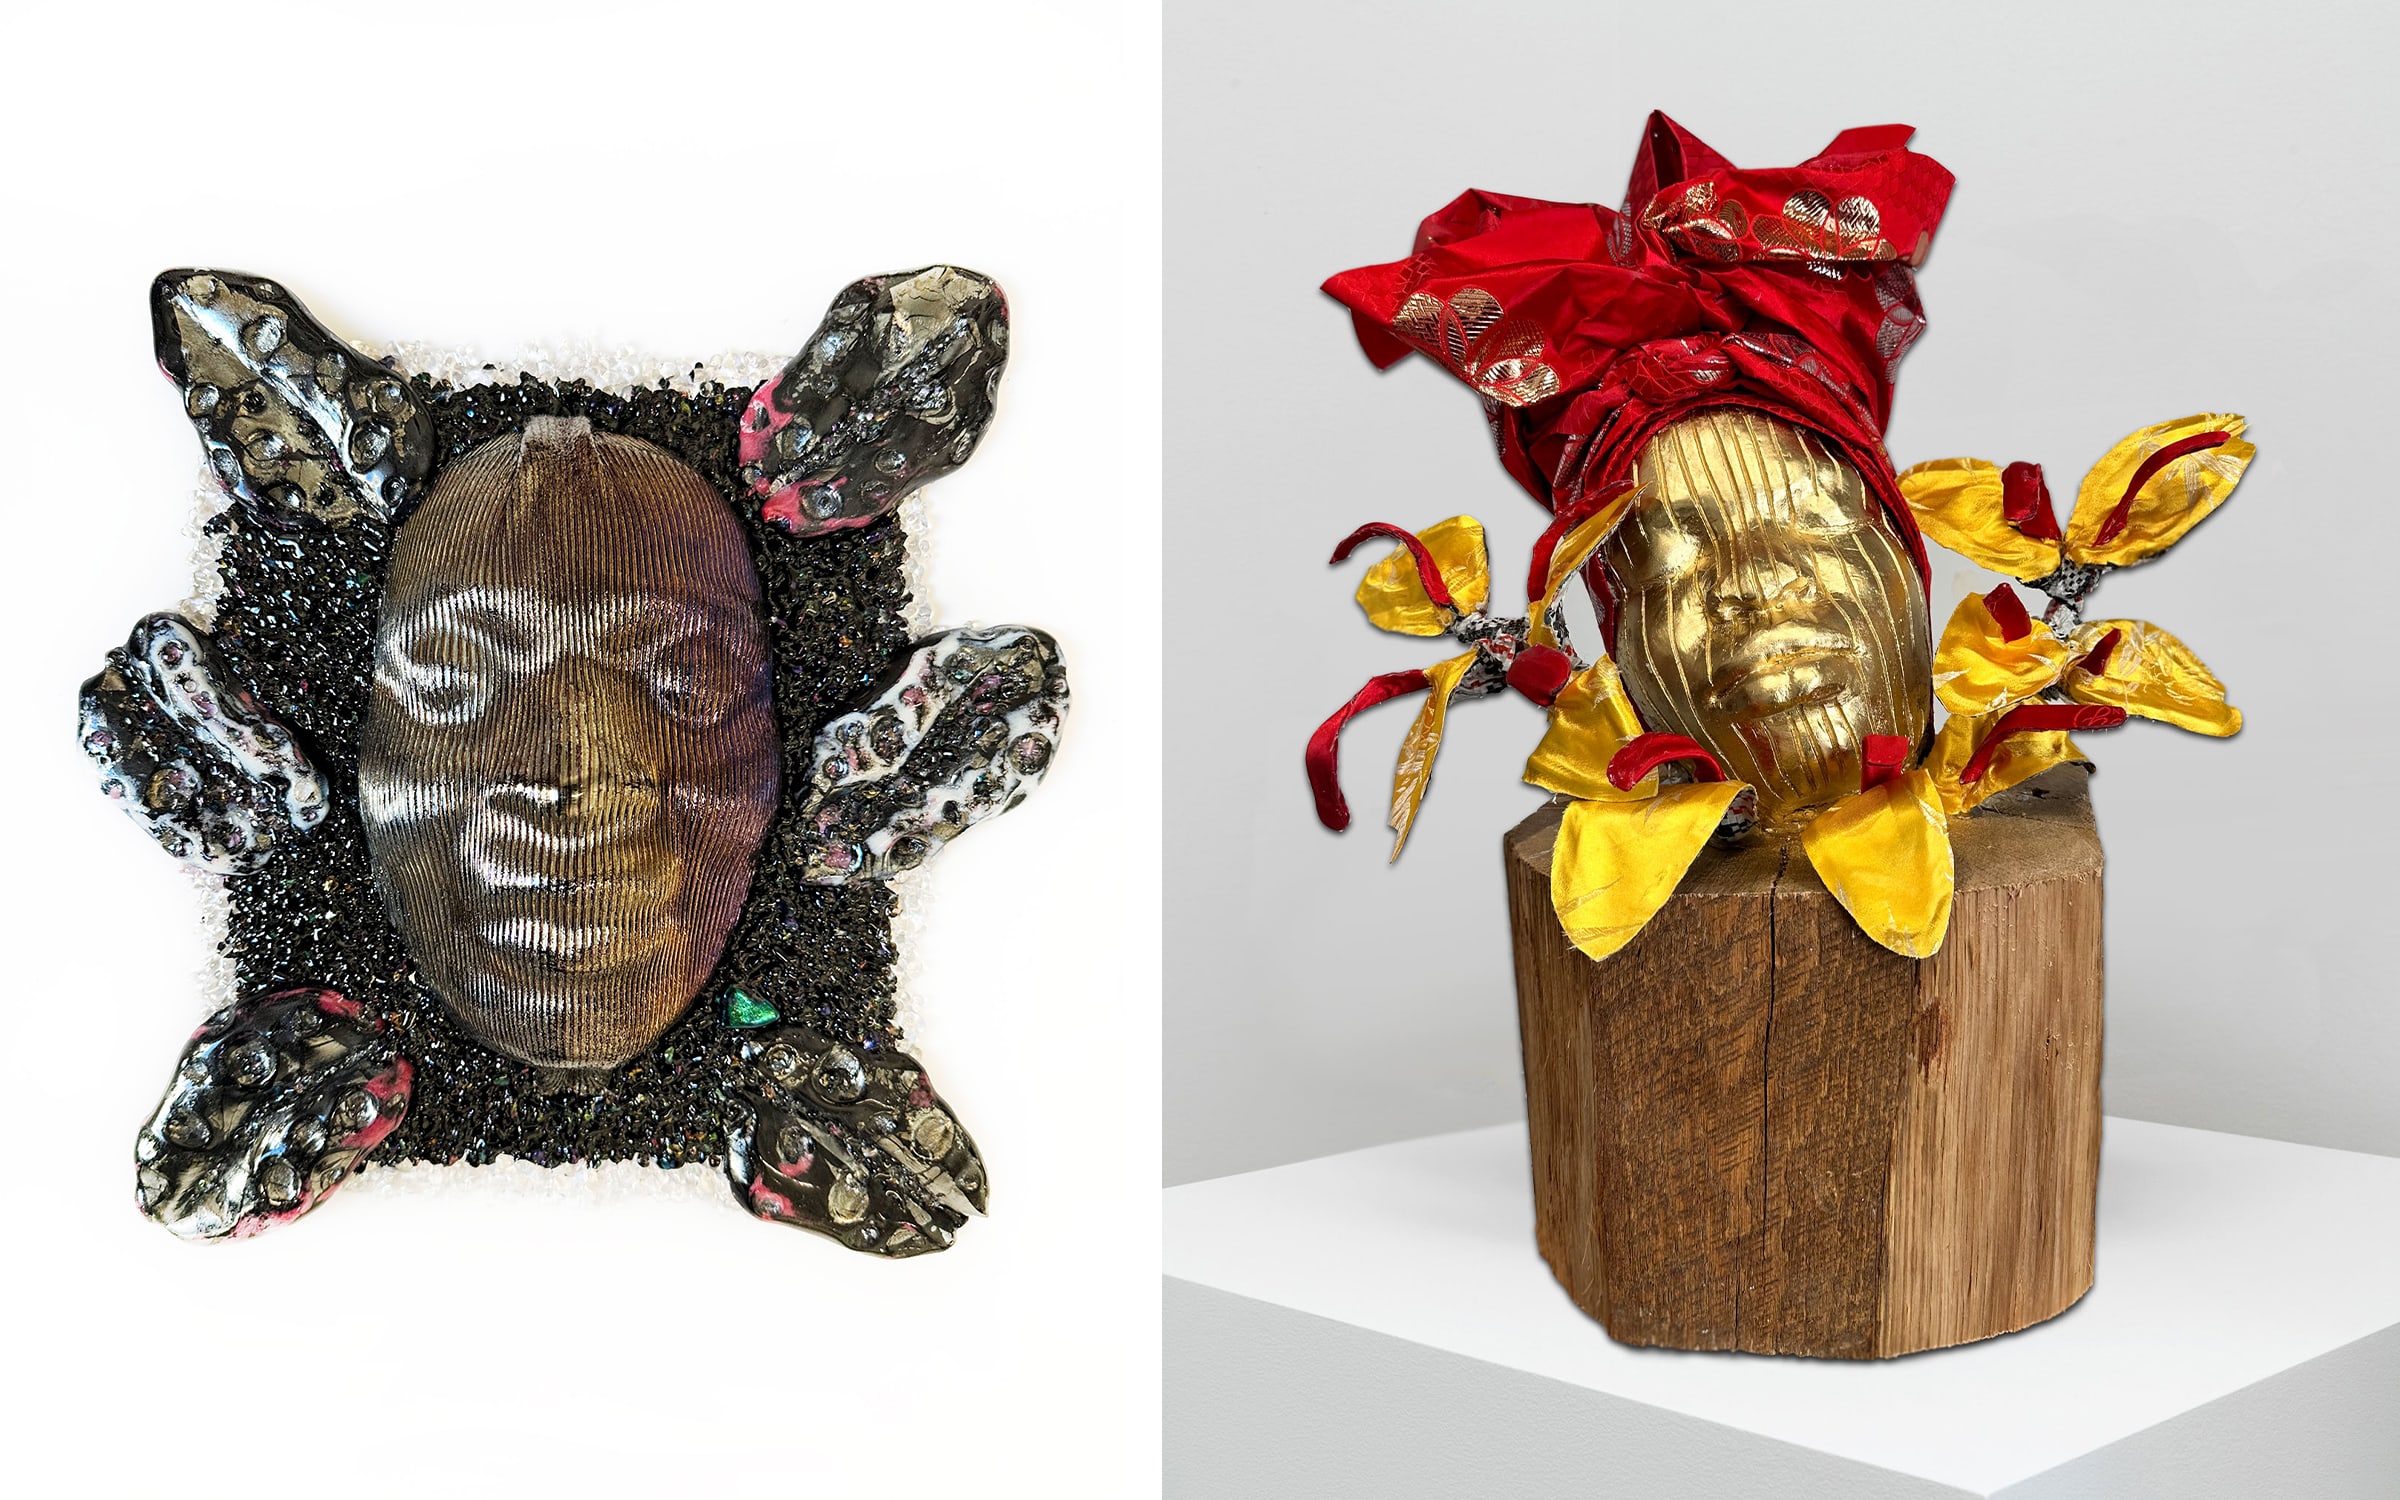 Left: Adebisi VIII, 2023. Right: Aso Ebi: Red & Yellow Gold, 2023. Both works by Layo Bright. Courtesy of the artist and Monique Meloche Gallery.